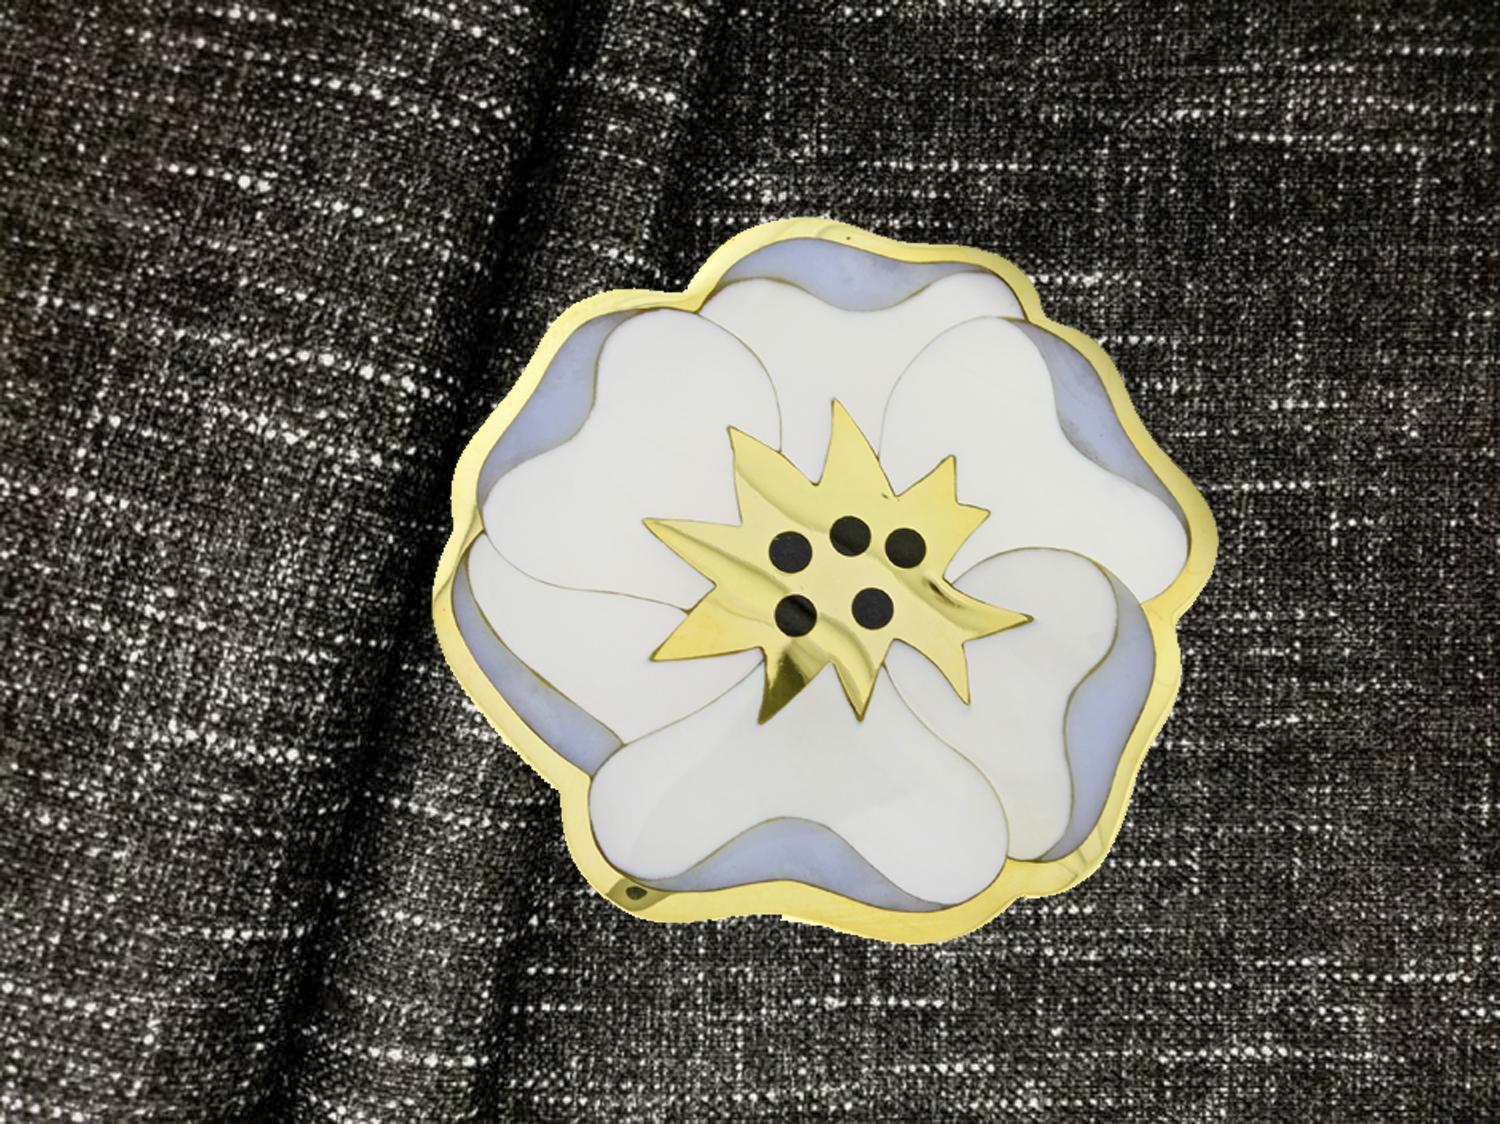 From Tiffany & Co.s designer Angela Cummings, an 18 Karat Allure flower, pansy brooch. The brooch is  inlaid with black jade, mother of pearl and blue lace agate.
Measuring 46.25mm in diameter